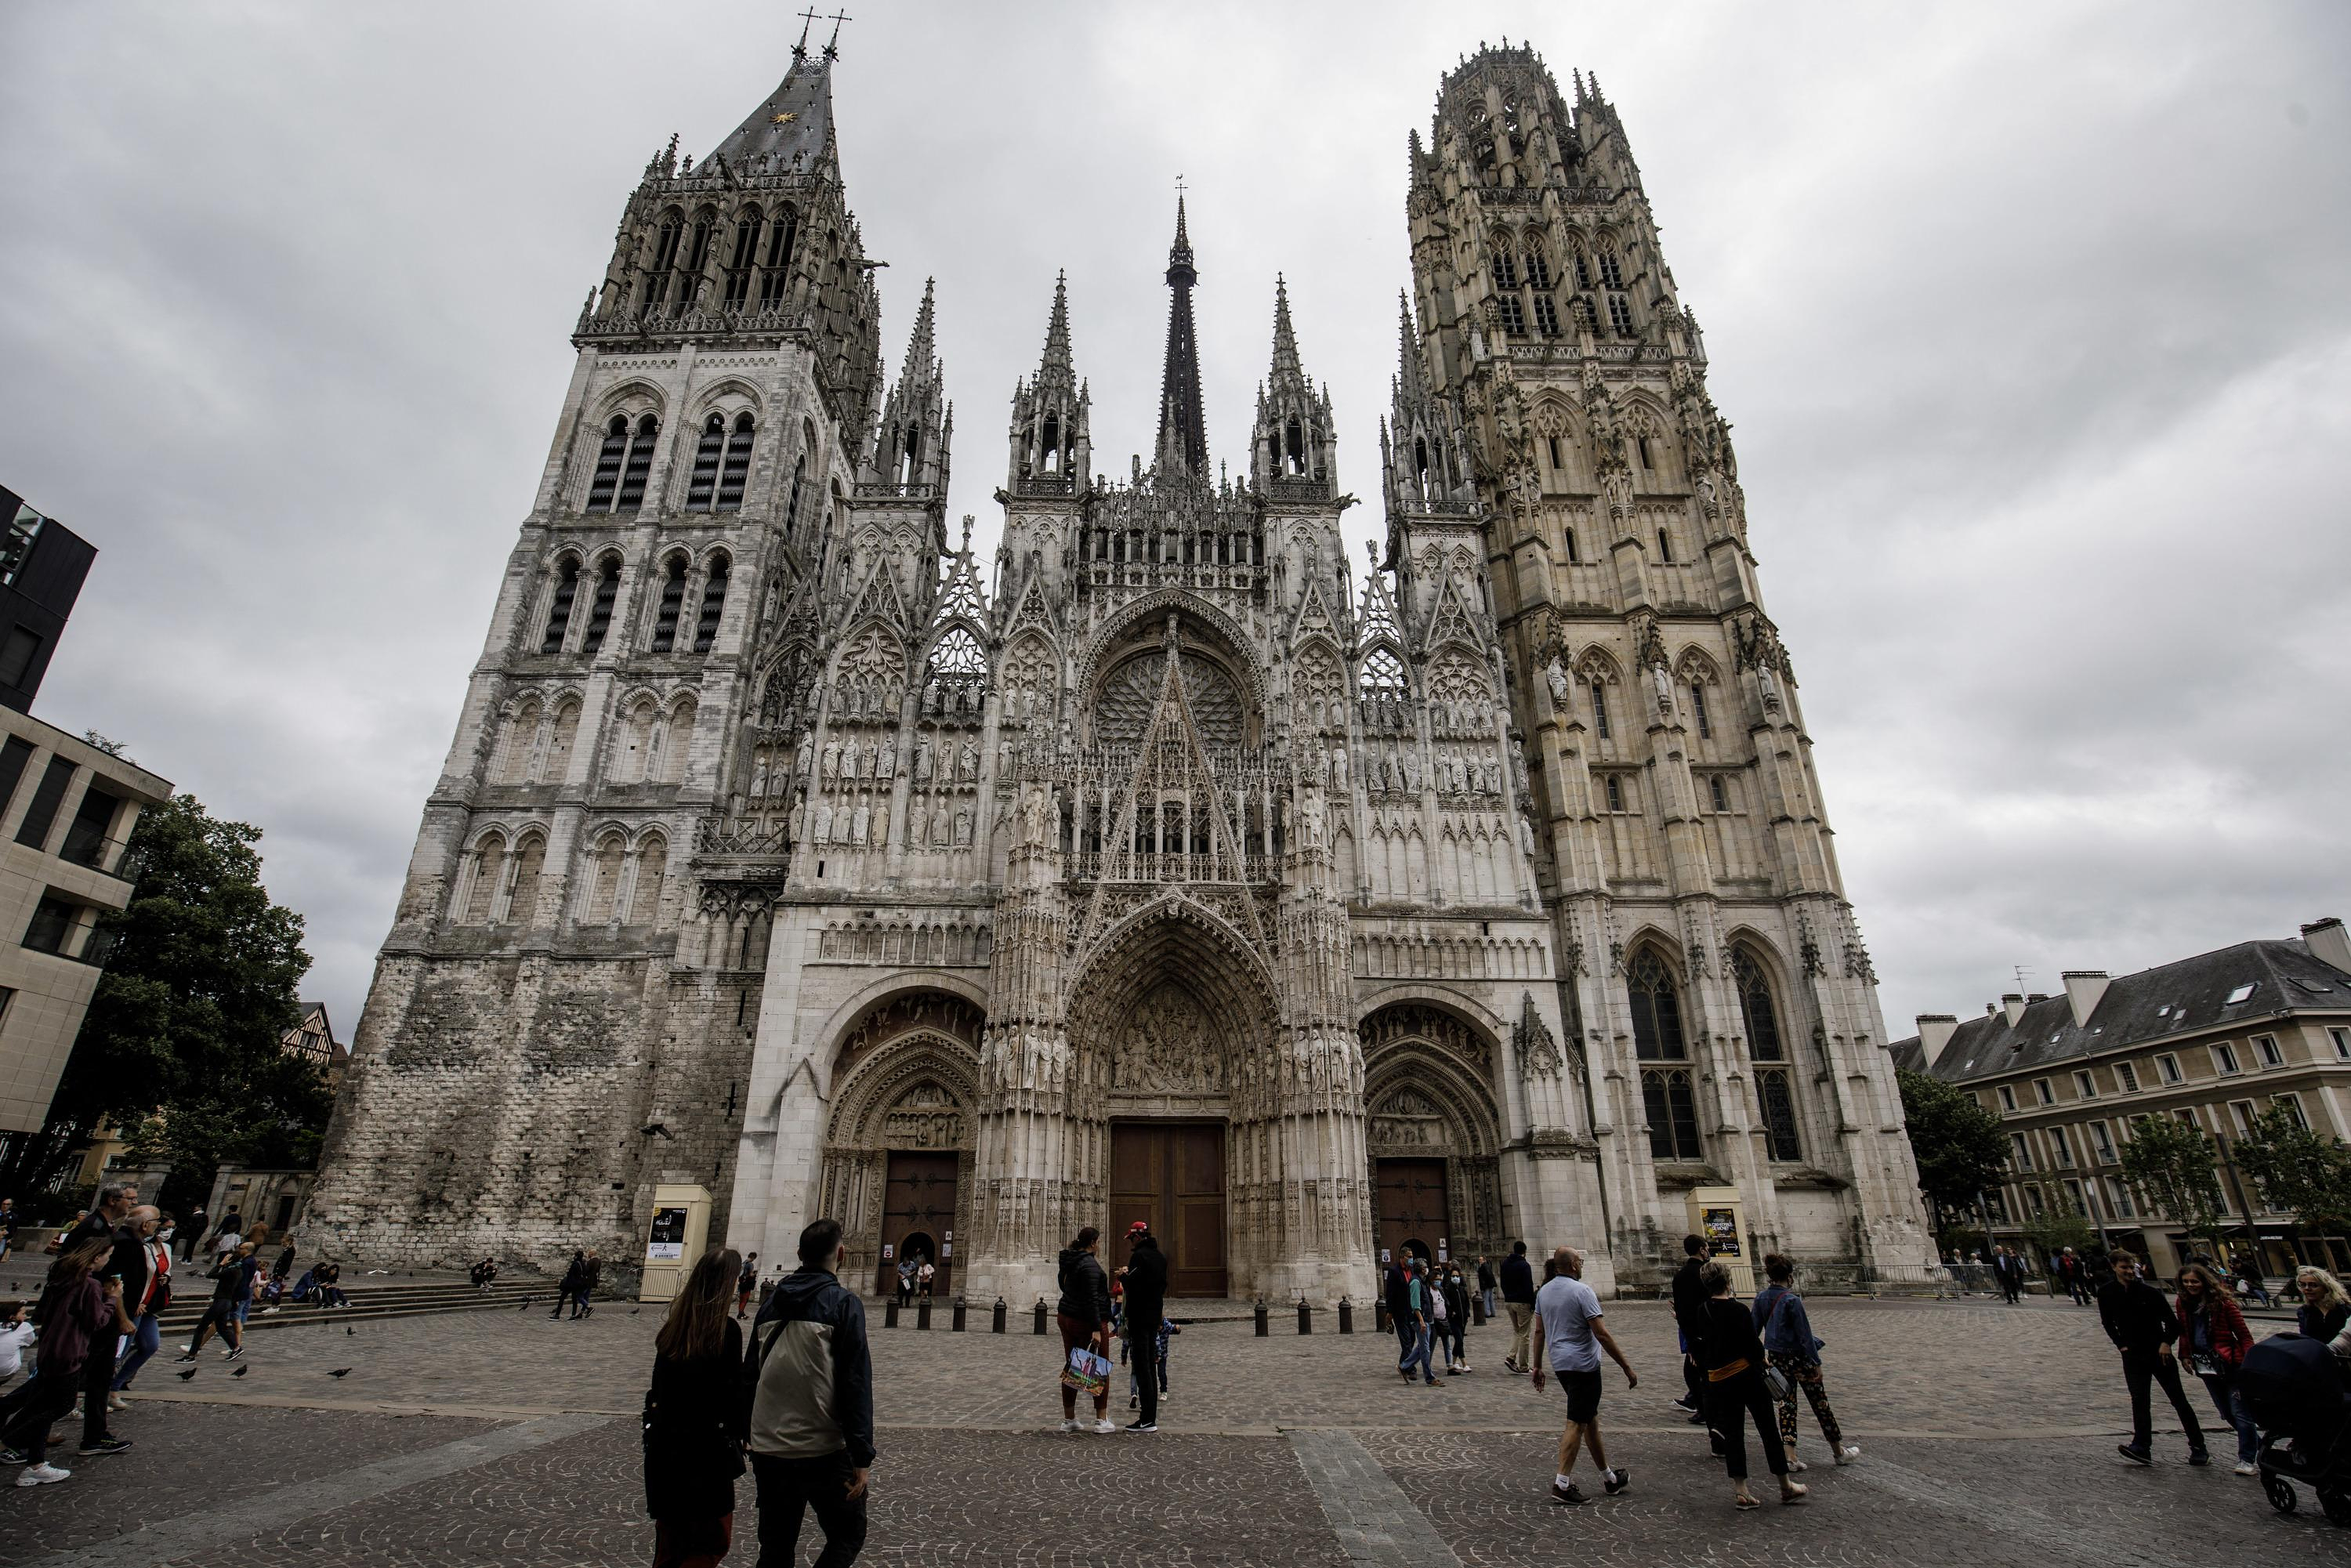 A complaint filed for concealment of stained glass windows from Rouen Cathedral